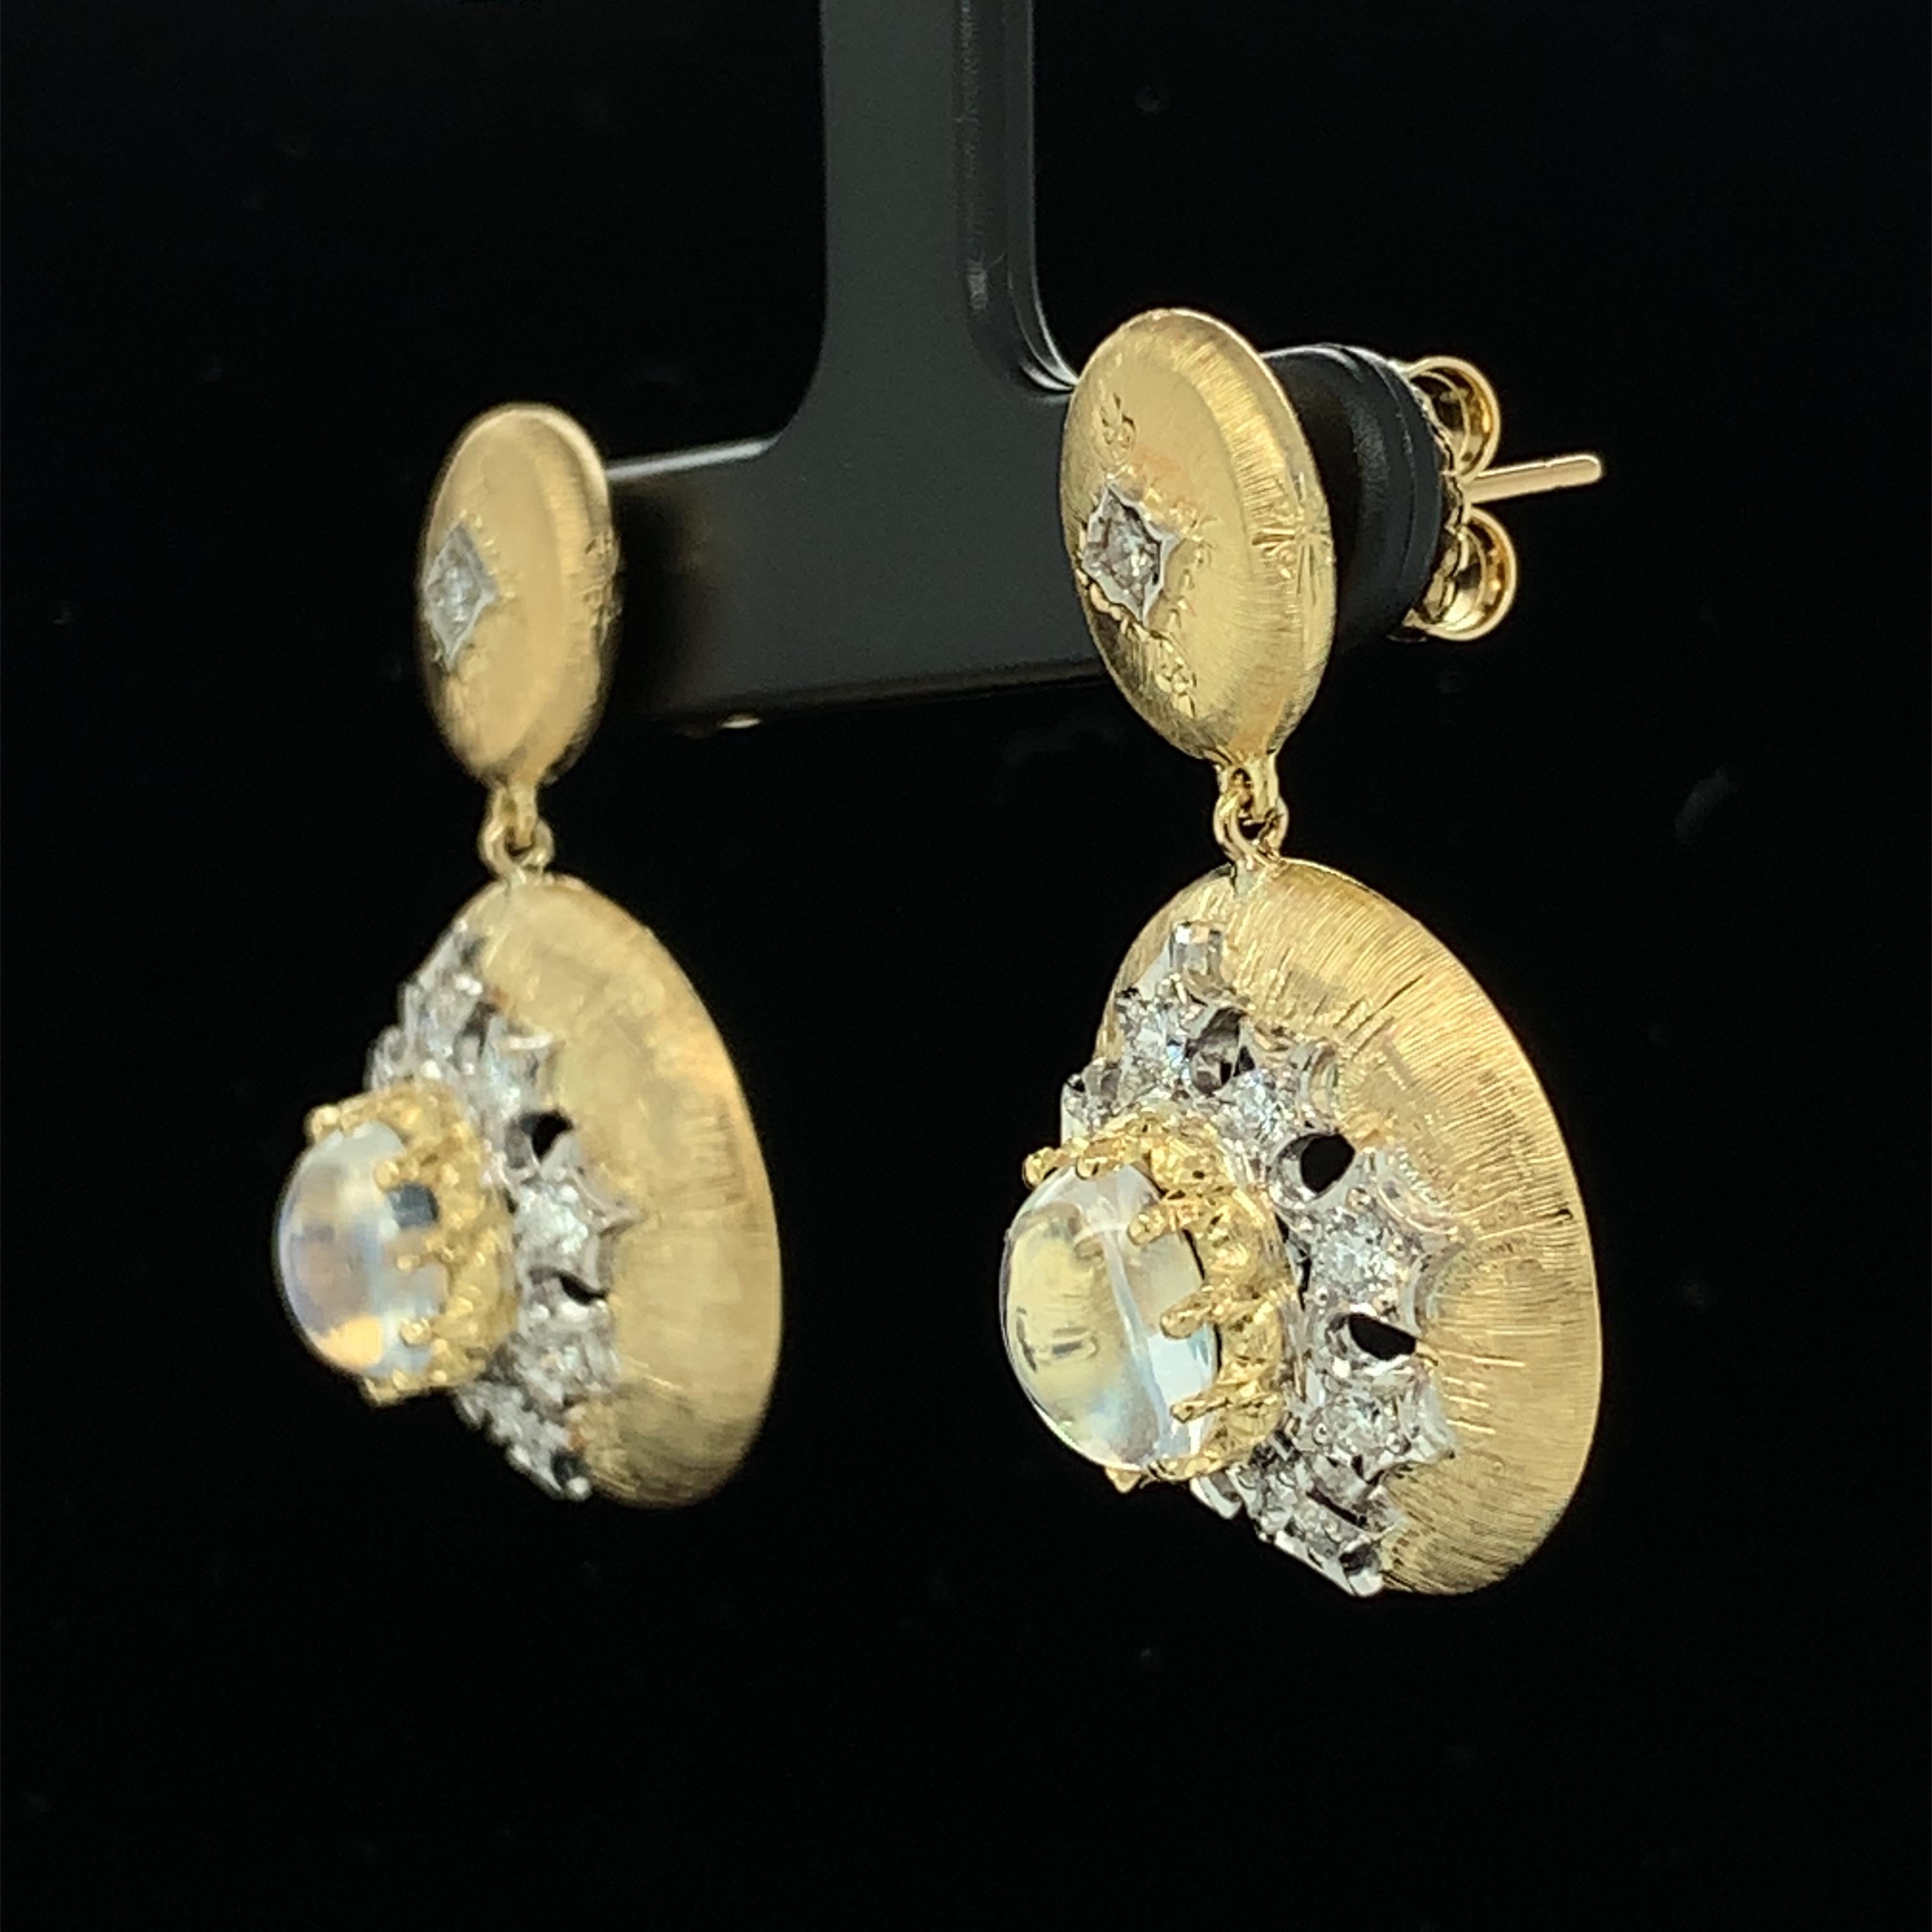 These Florentine style earrings are elegance personified! They feature two high-domed oval rainbow moonstones that exhibit highly-prized, colorful adularescence, surrounded by individually set, sparkly round brilliant cut diamonds. Handmade in 18k